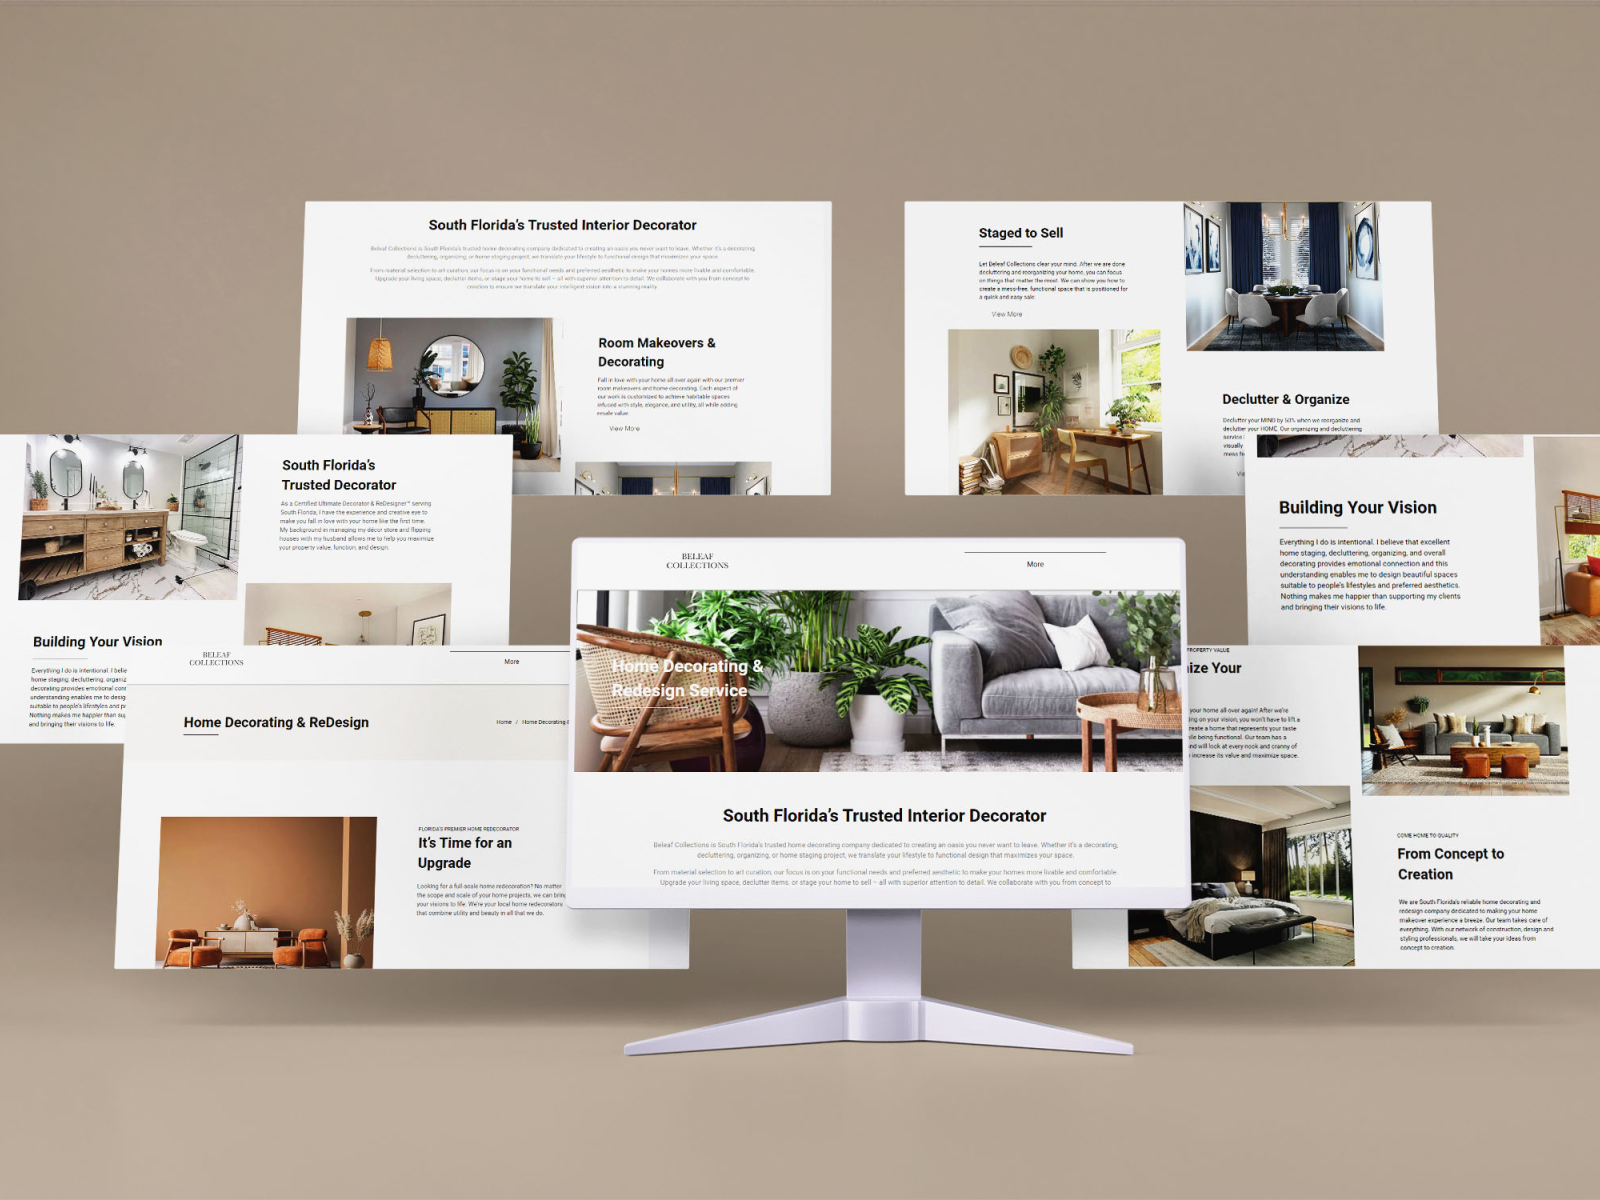 A Wix Home Decoration Website by Comfort Adegoke on Dribbble